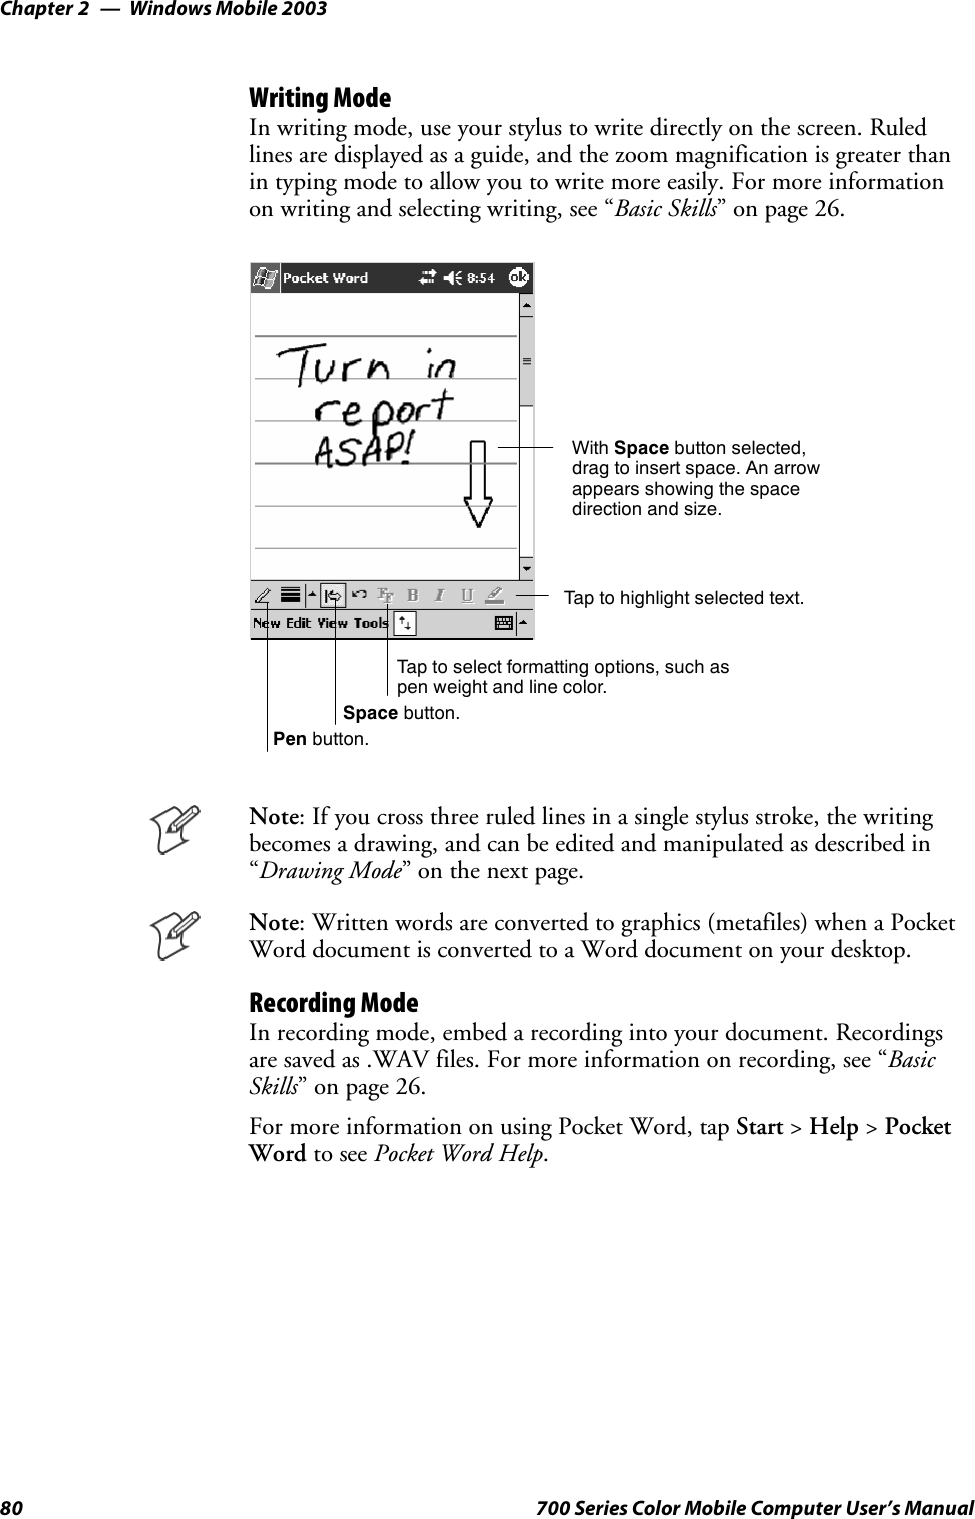 Windows Mobile 2003Chapter —280 700 Series Color Mobile Computer User’s ManualWriting ModeIn writing mode, use your stylus to write directly on the screen. Ruledlines are displayed as a guide, and the zoom magnification is greater thanin typing mode to allow you to write more easily. For more informationon writing and selecting writing, see “Basic Skills” on page 26.Tap to select formatting options, such aspen weight and line color.With Space button selected,drag to insert space. An arrowappears showing the spacedirection and size.Tap to highlight selected text.Space button.Pen button.Note: If you cross three ruled lines in a single stylus stroke, the writingbecomes a drawing, and can be edited and manipulated as described in“Drawing Mode”onthenextpage.Note: Written words are converted to graphics (metafiles) when a PocketWord document is converted to a Word document on your desktop.Recording ModeIn recording mode, embed a recording into your document. Recordingsare saved as .WAV files. For more information on recording, see “BasicSkills” on page 26.For more information on using Pocket Word, tap Start &gt;Help &gt;PocketWord to see Pocket Word Help.